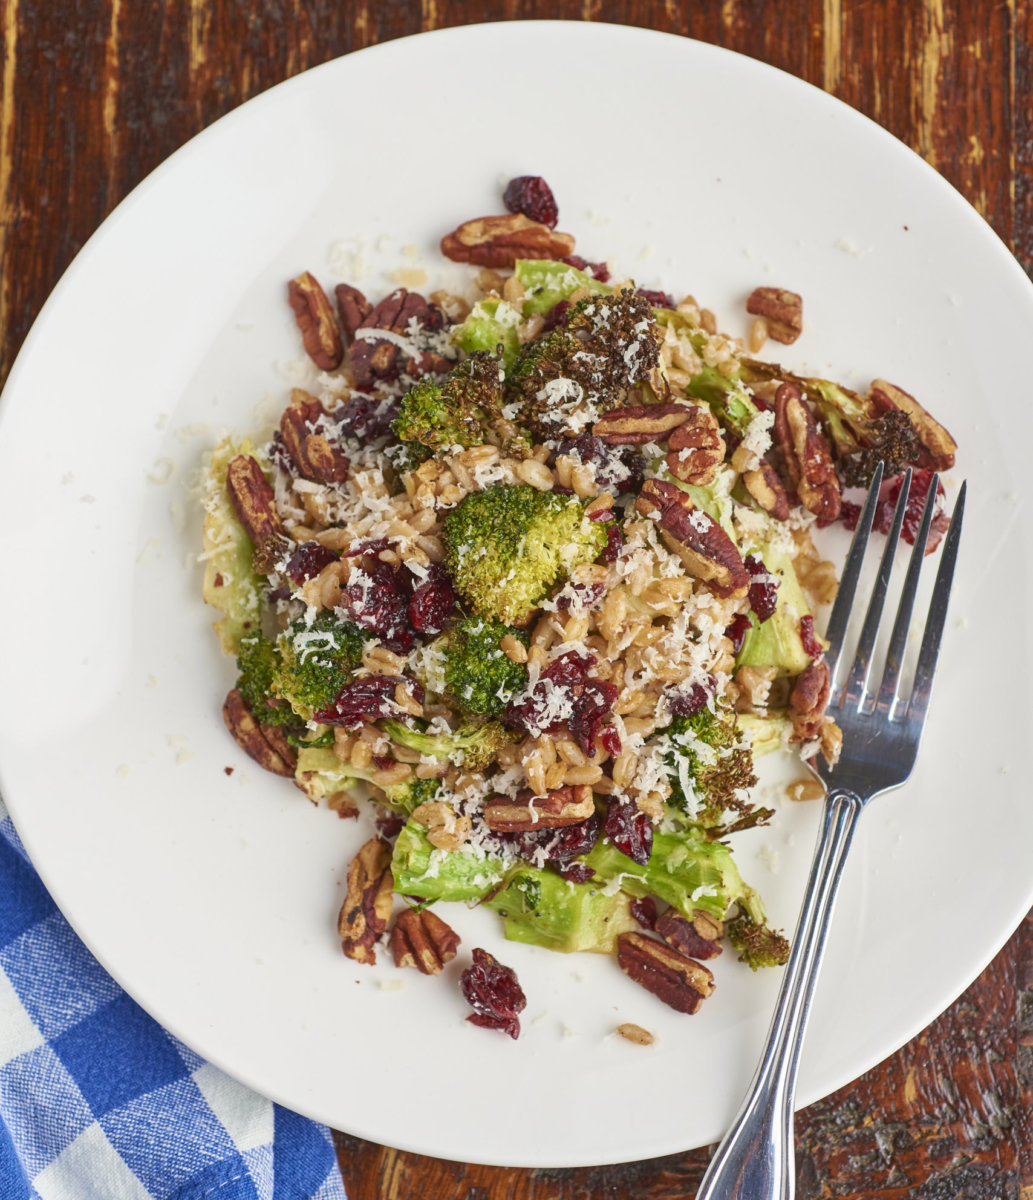 The Roasted Broccoli Salad is on the fall/winter menu at Baron's Cove